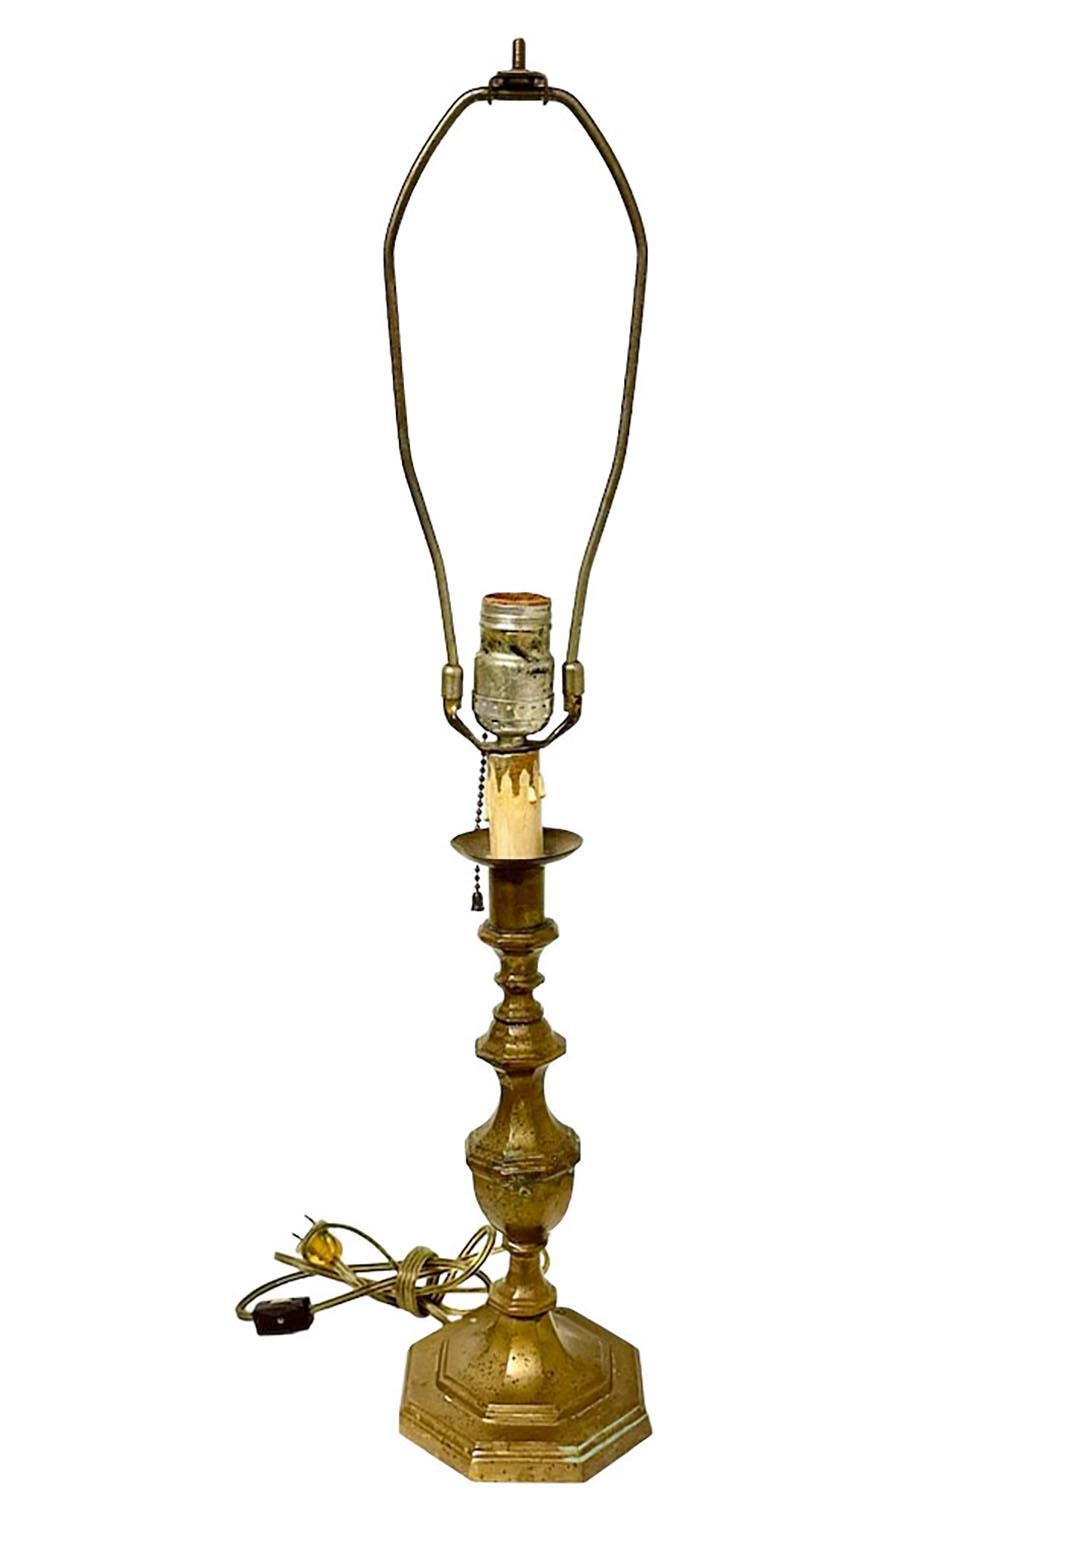 An elegant 19th century French bronze candlestick lamp with pull chain. The cord has a click switch.